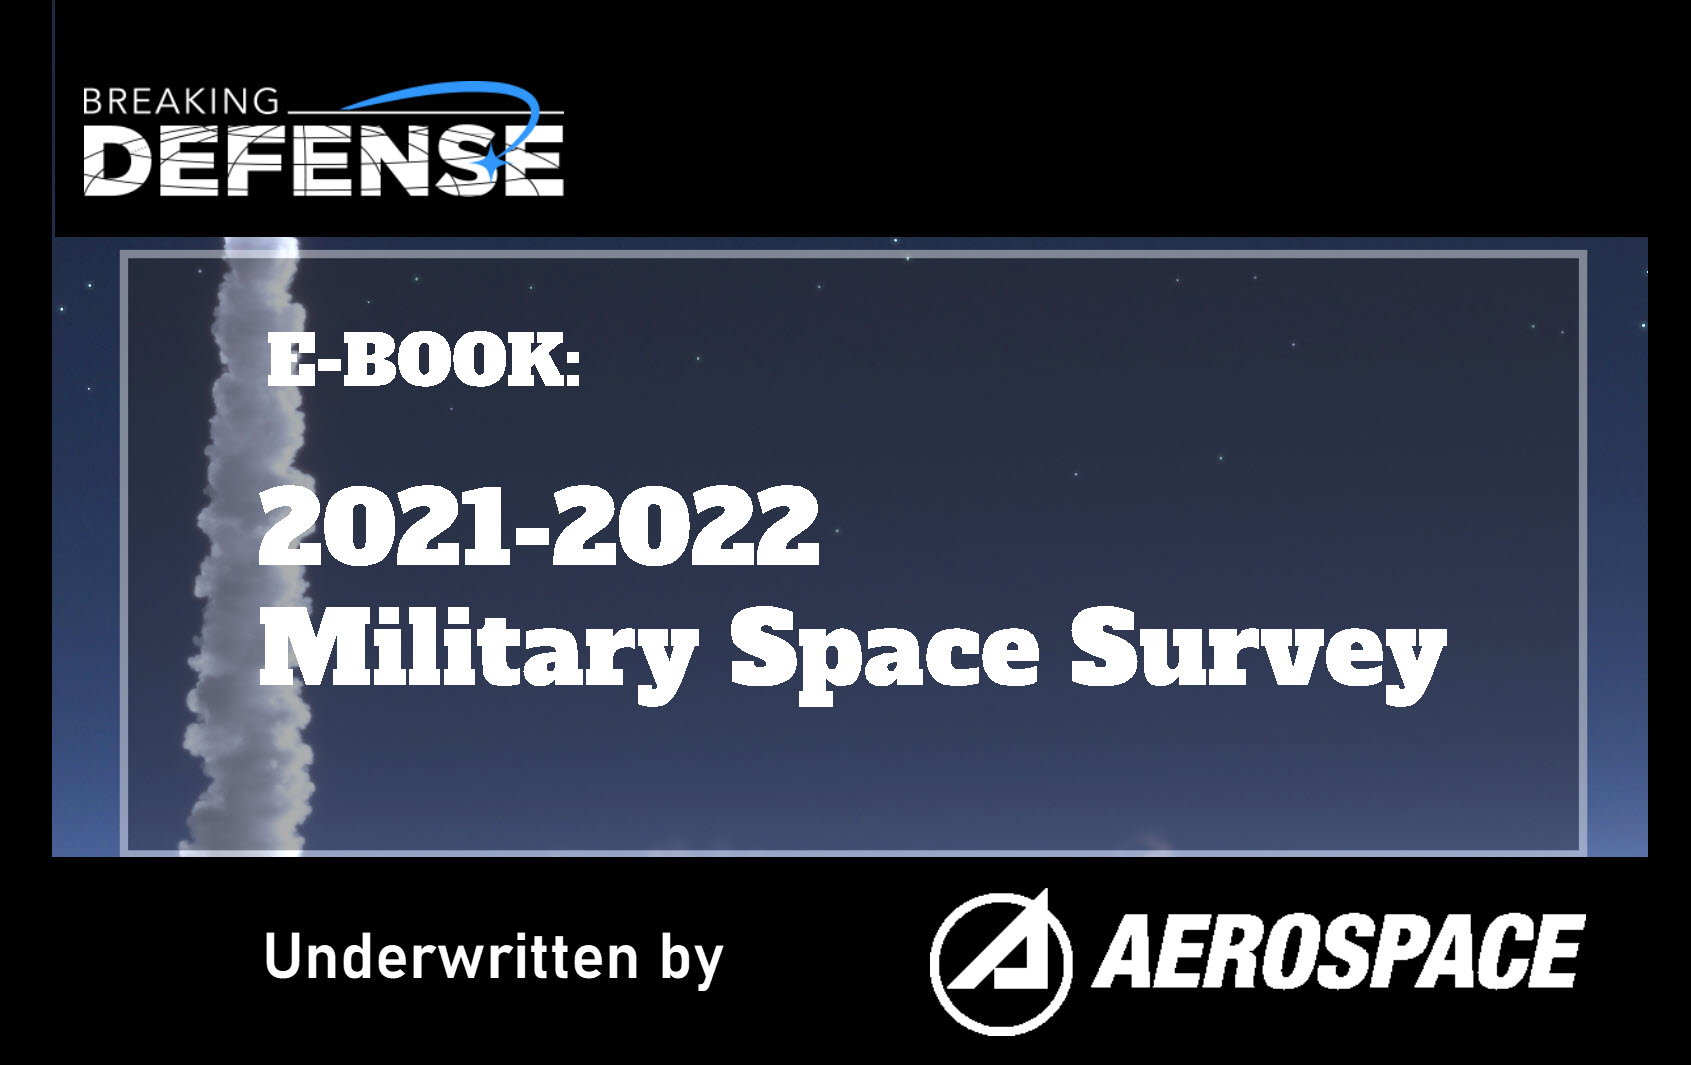 Download the Military Space Survey eBook